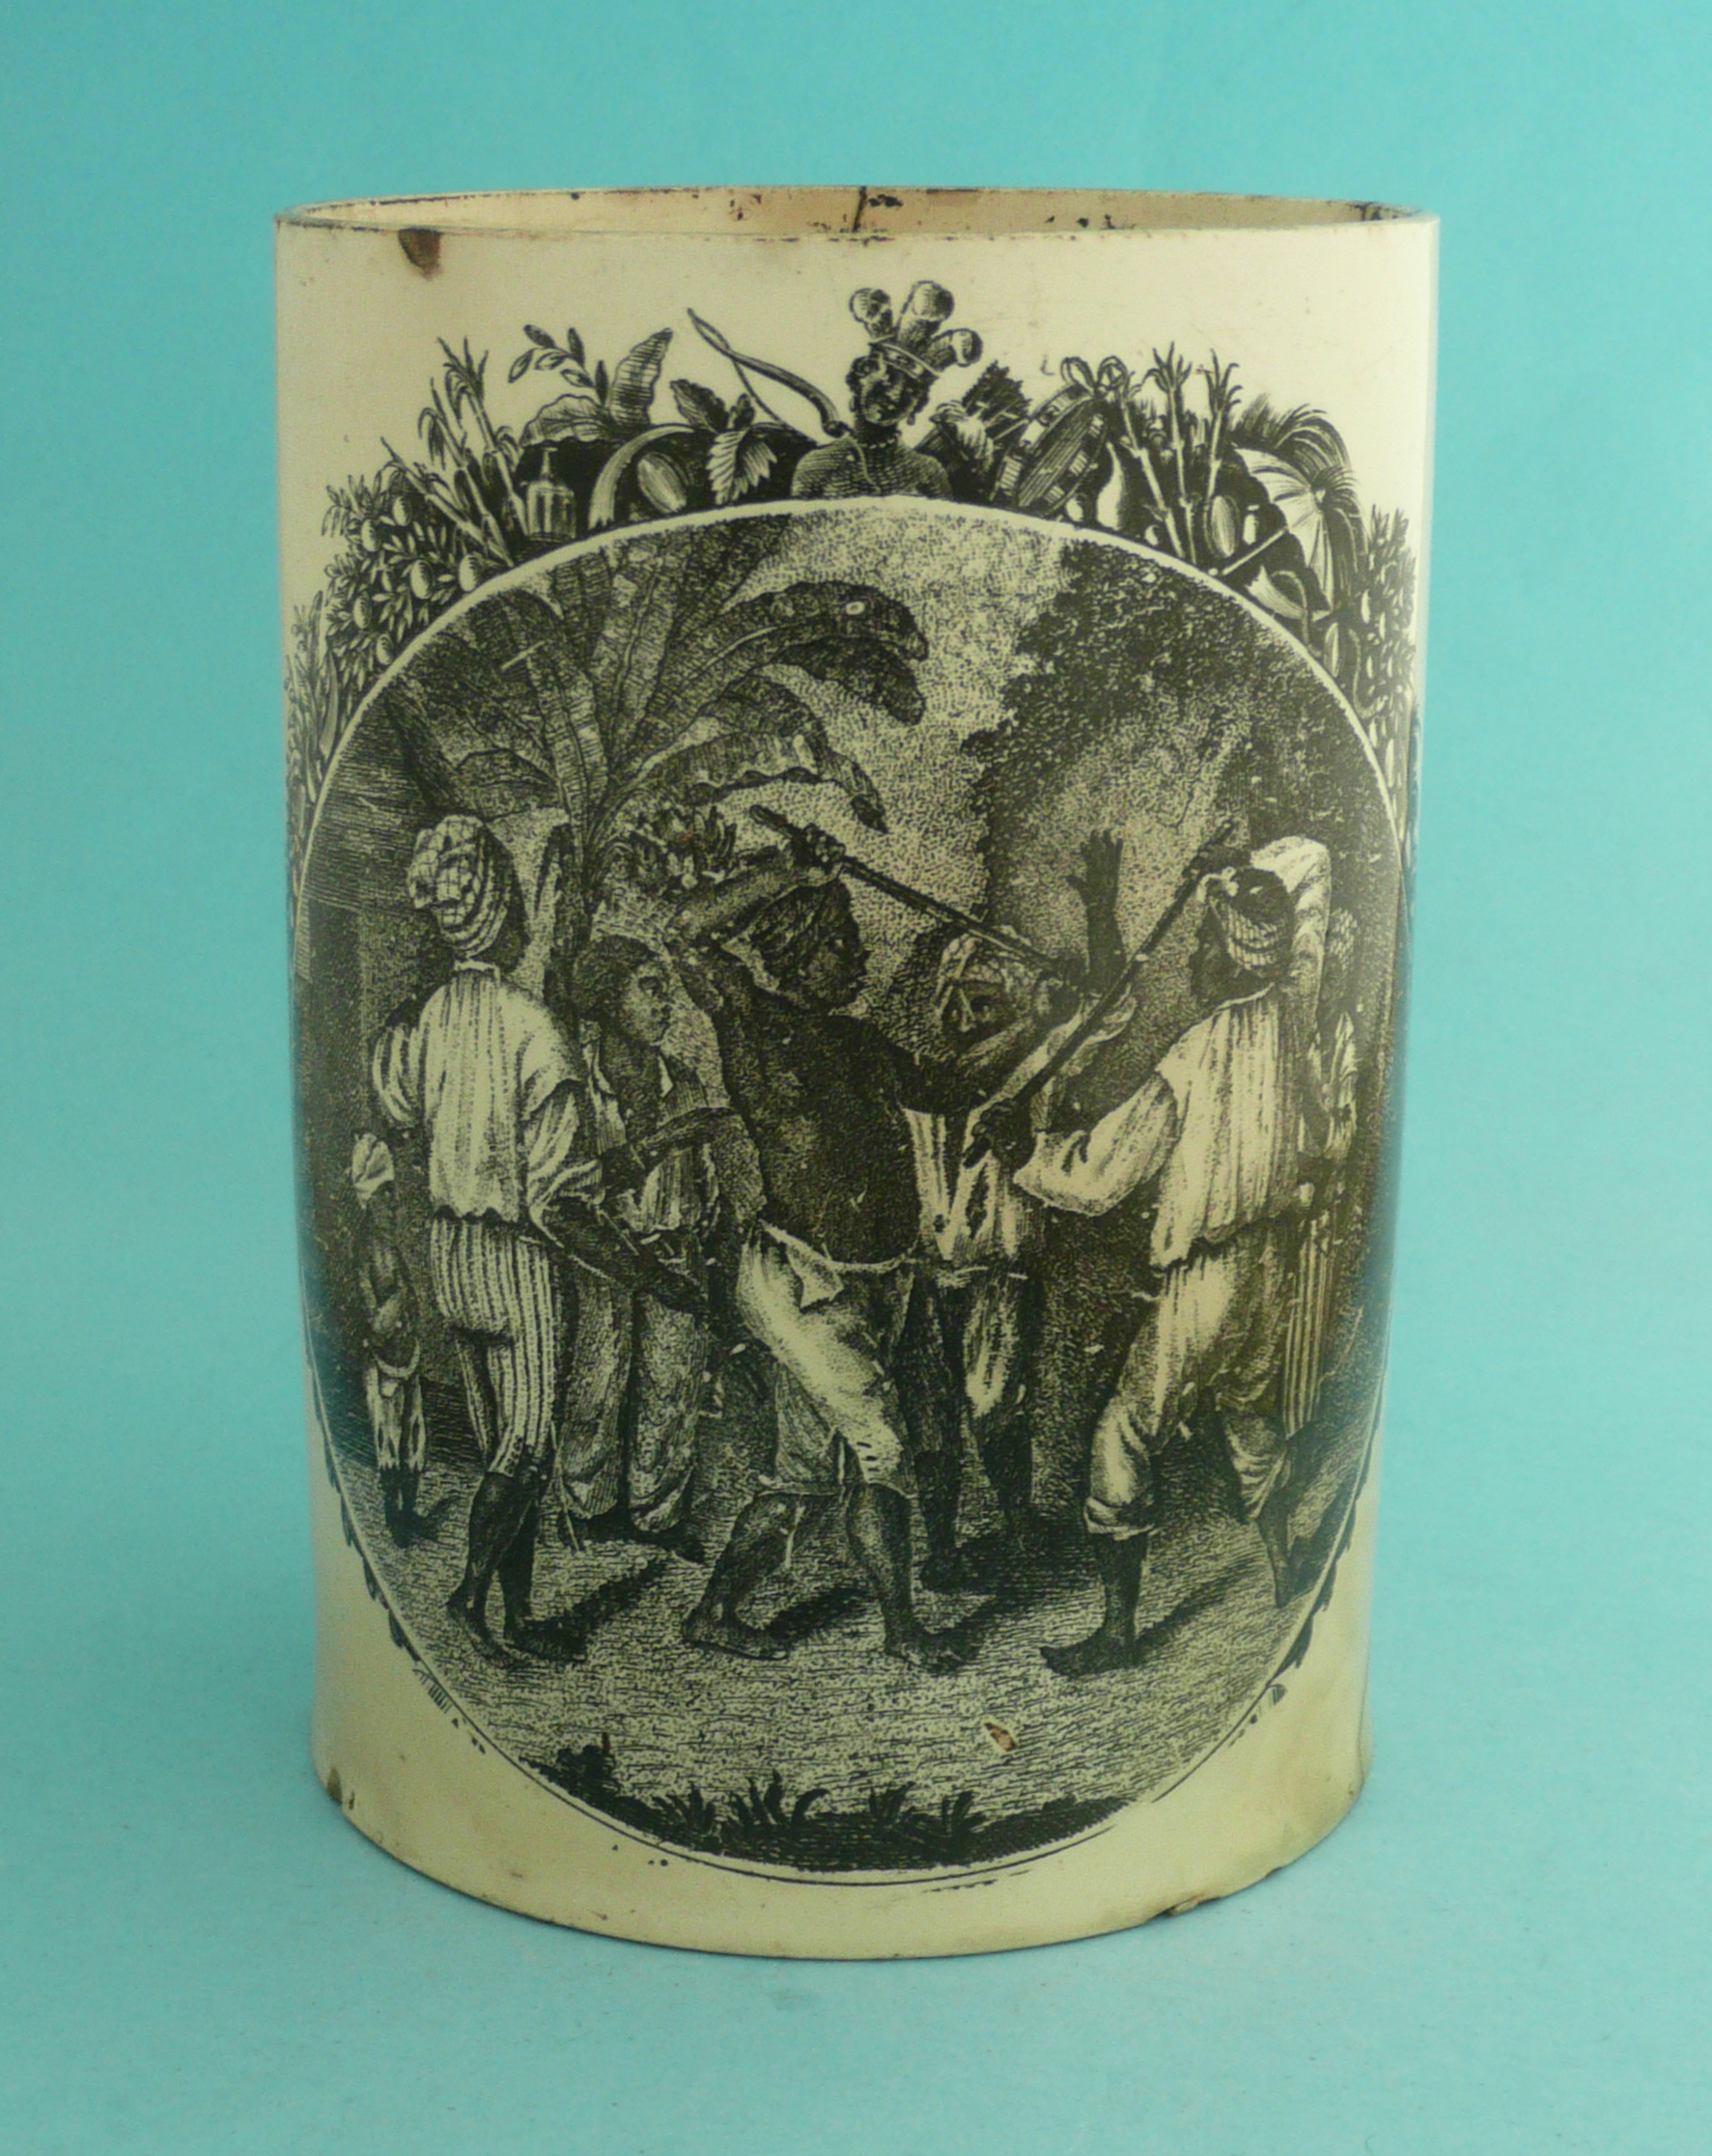 Anti-Slavery: a creamware cylindrical tankard printed in black with a scene of a cudgelling